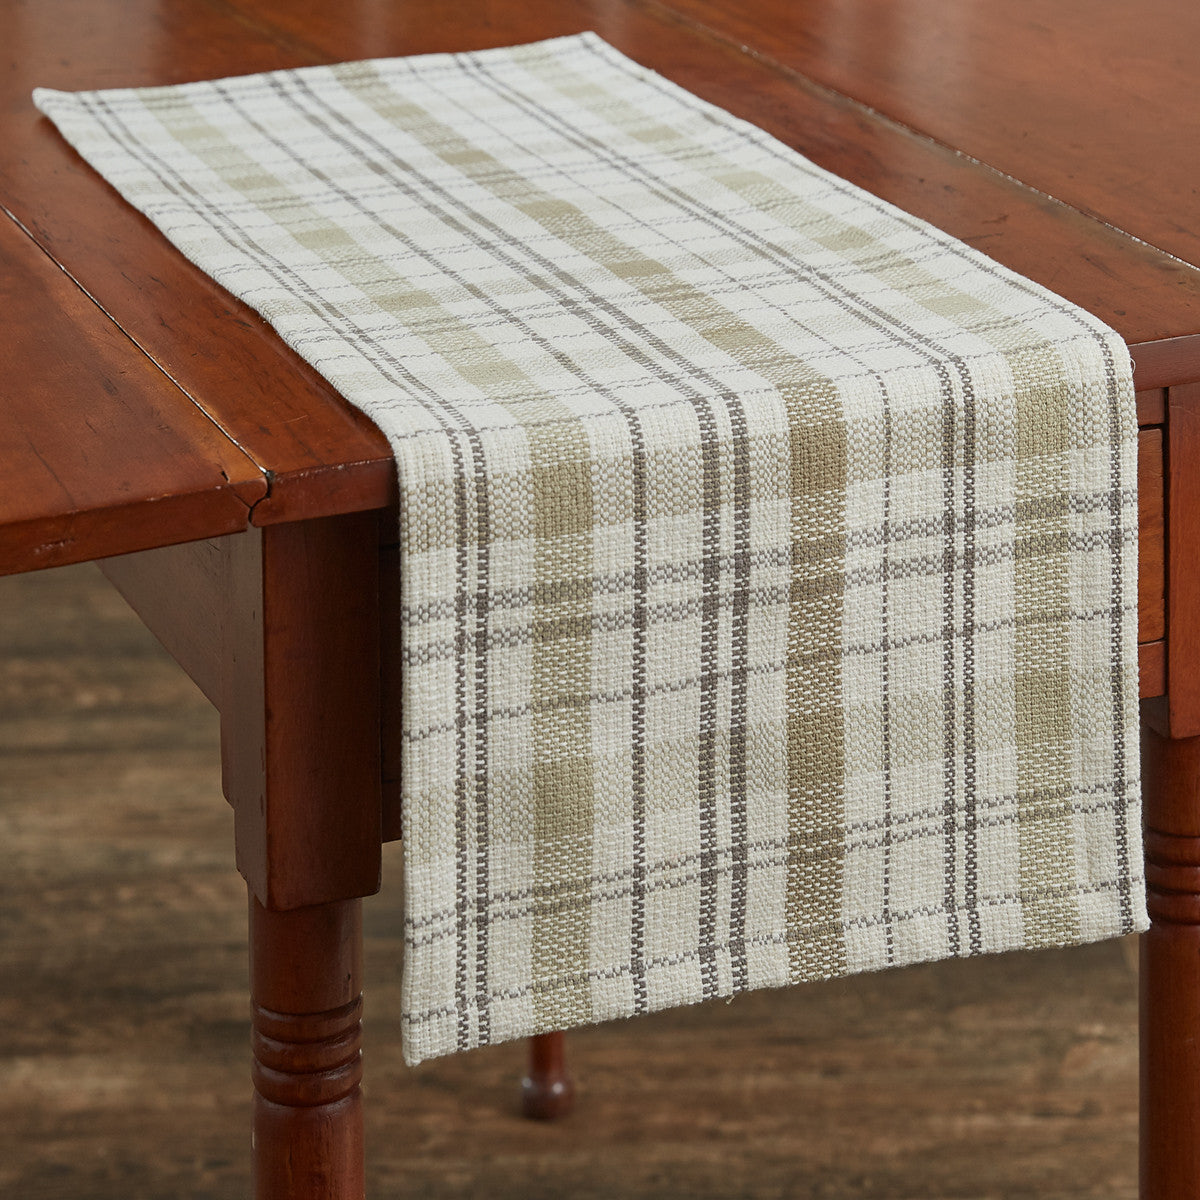 In The Meadow Plaid Table Runner 36"L Set of 2  Park Designs